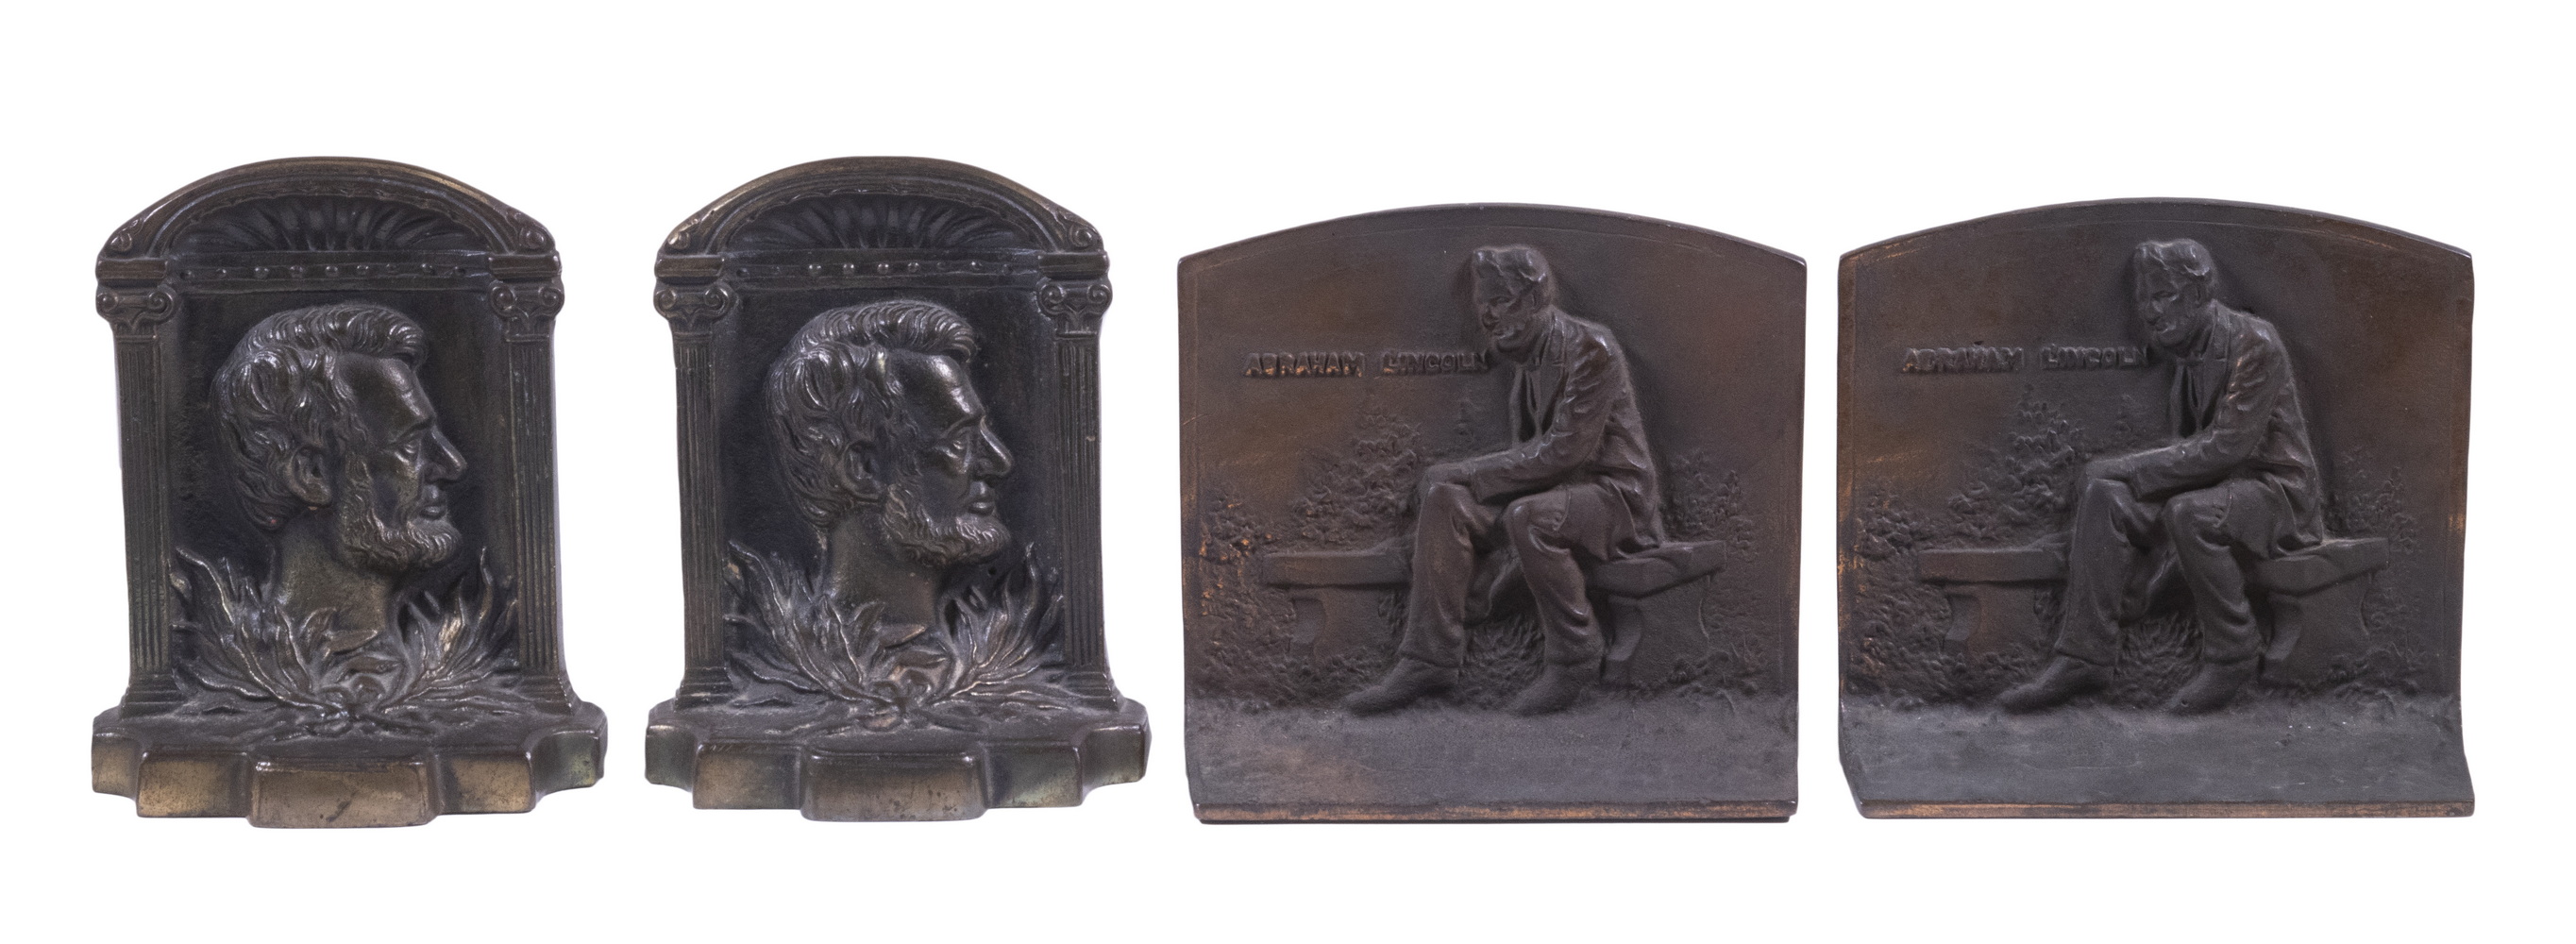 ABRAHAM LINCOLN BRONZE BOOKENDS 3025b5